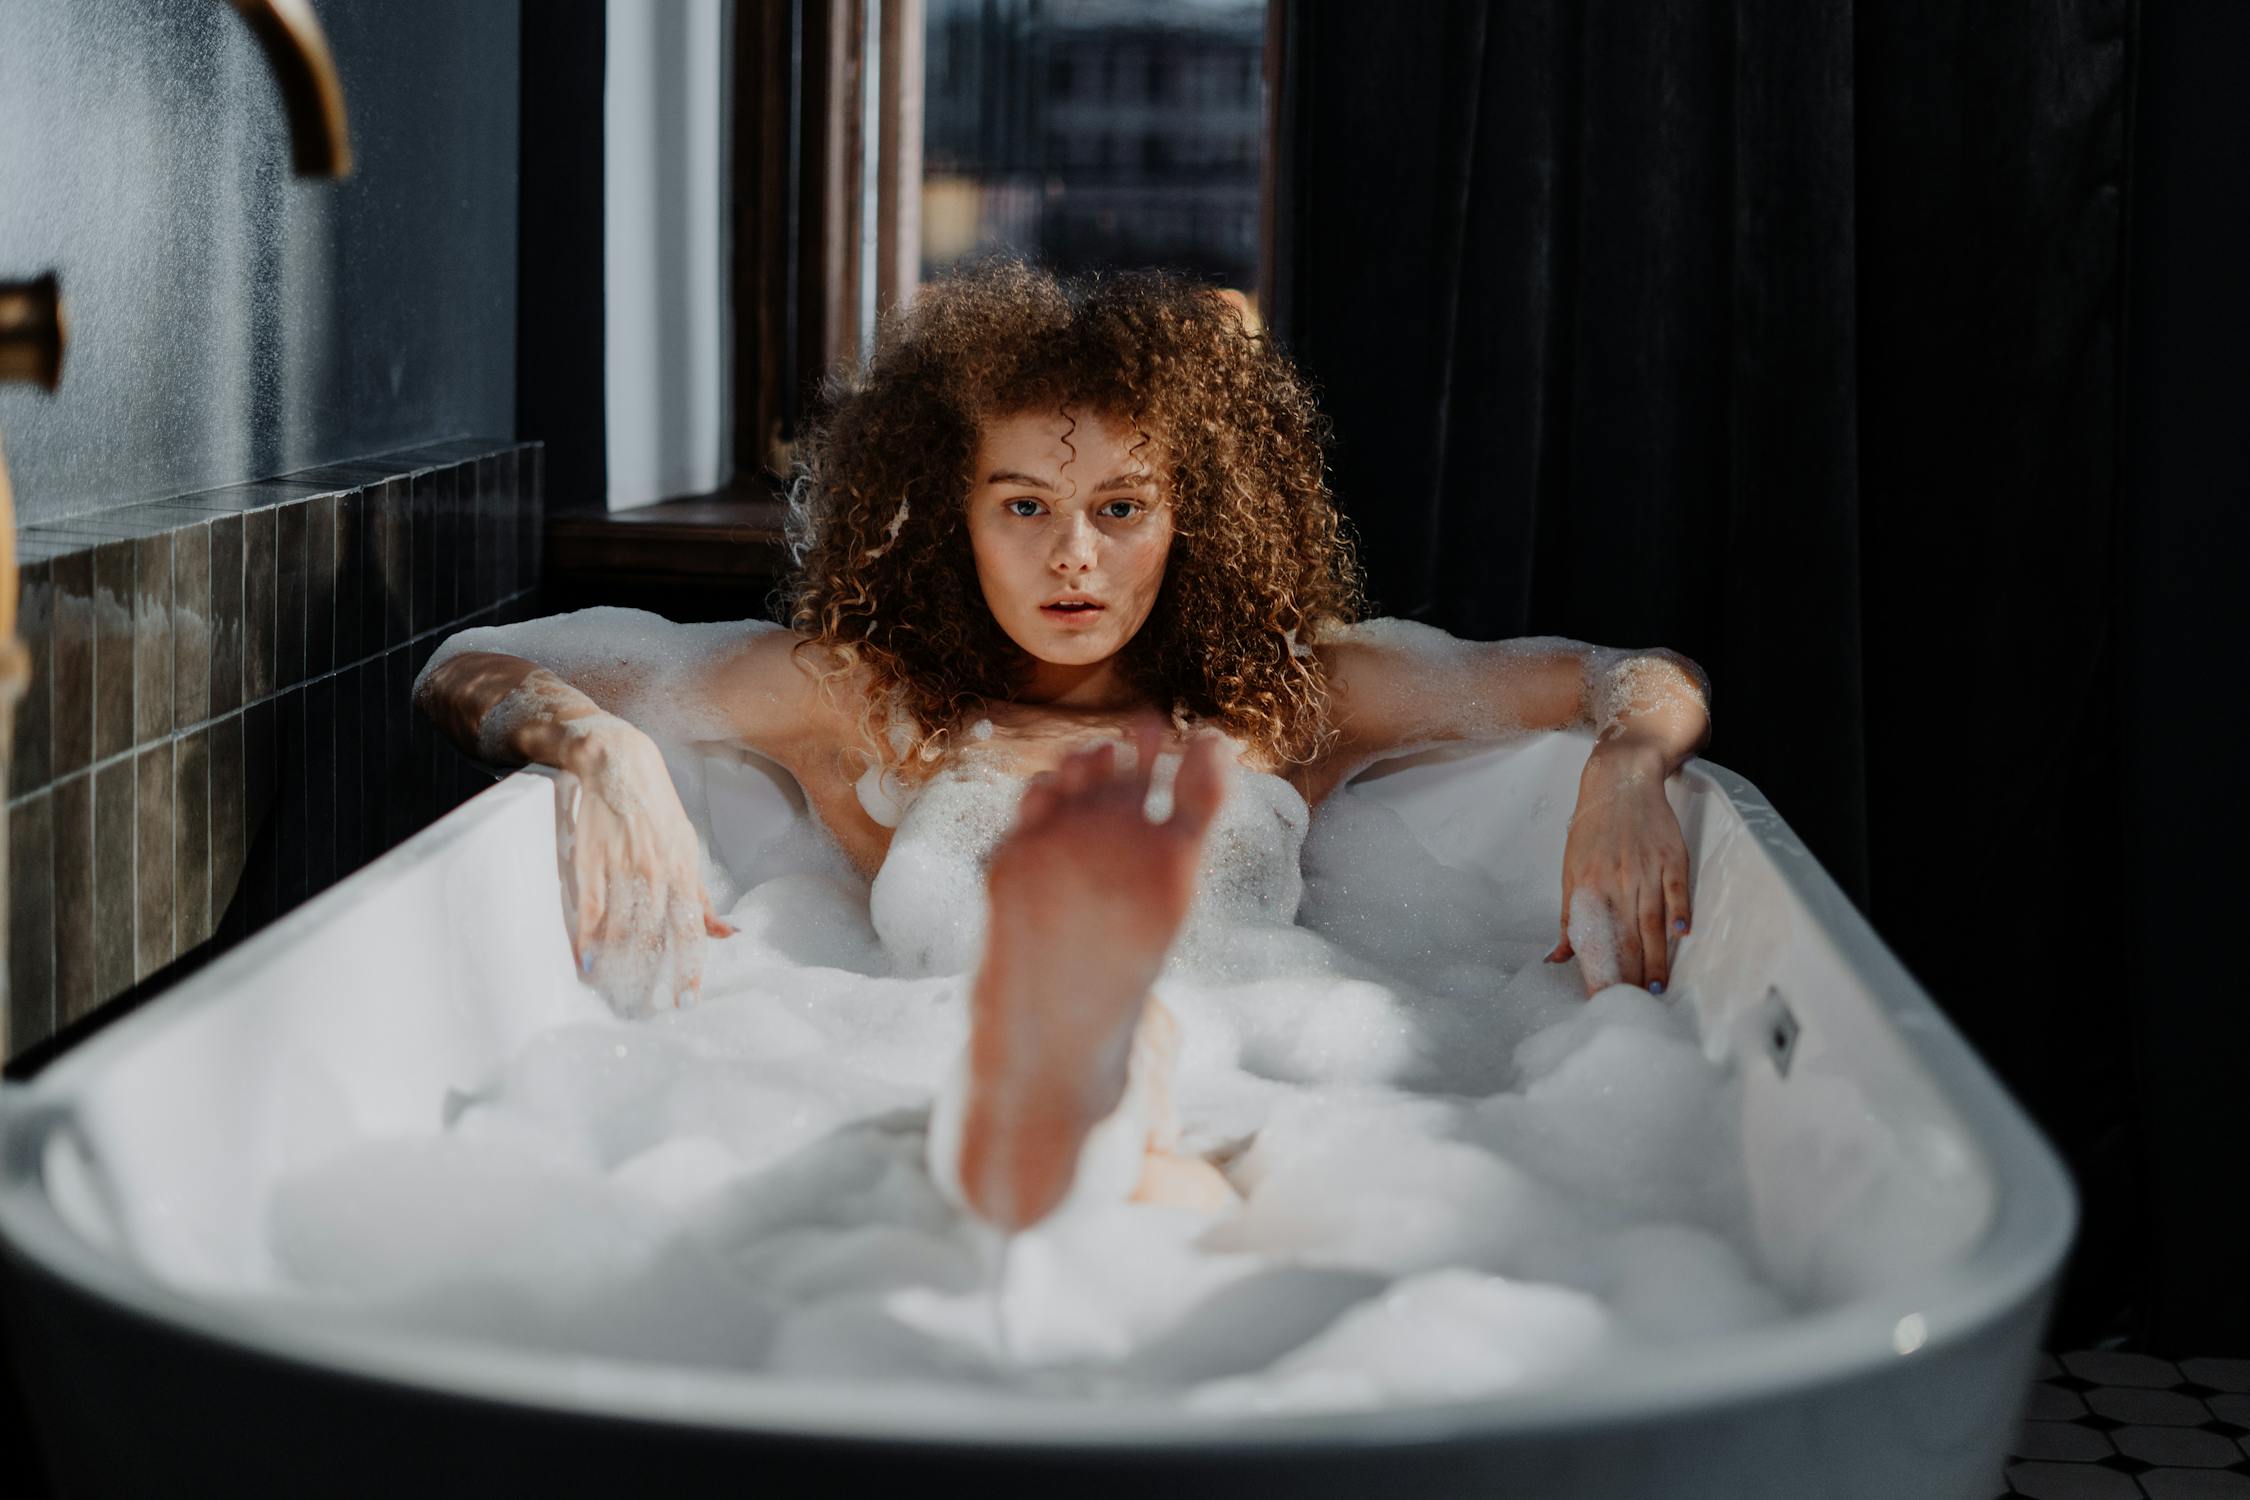 Woman in Bathtub With Water.